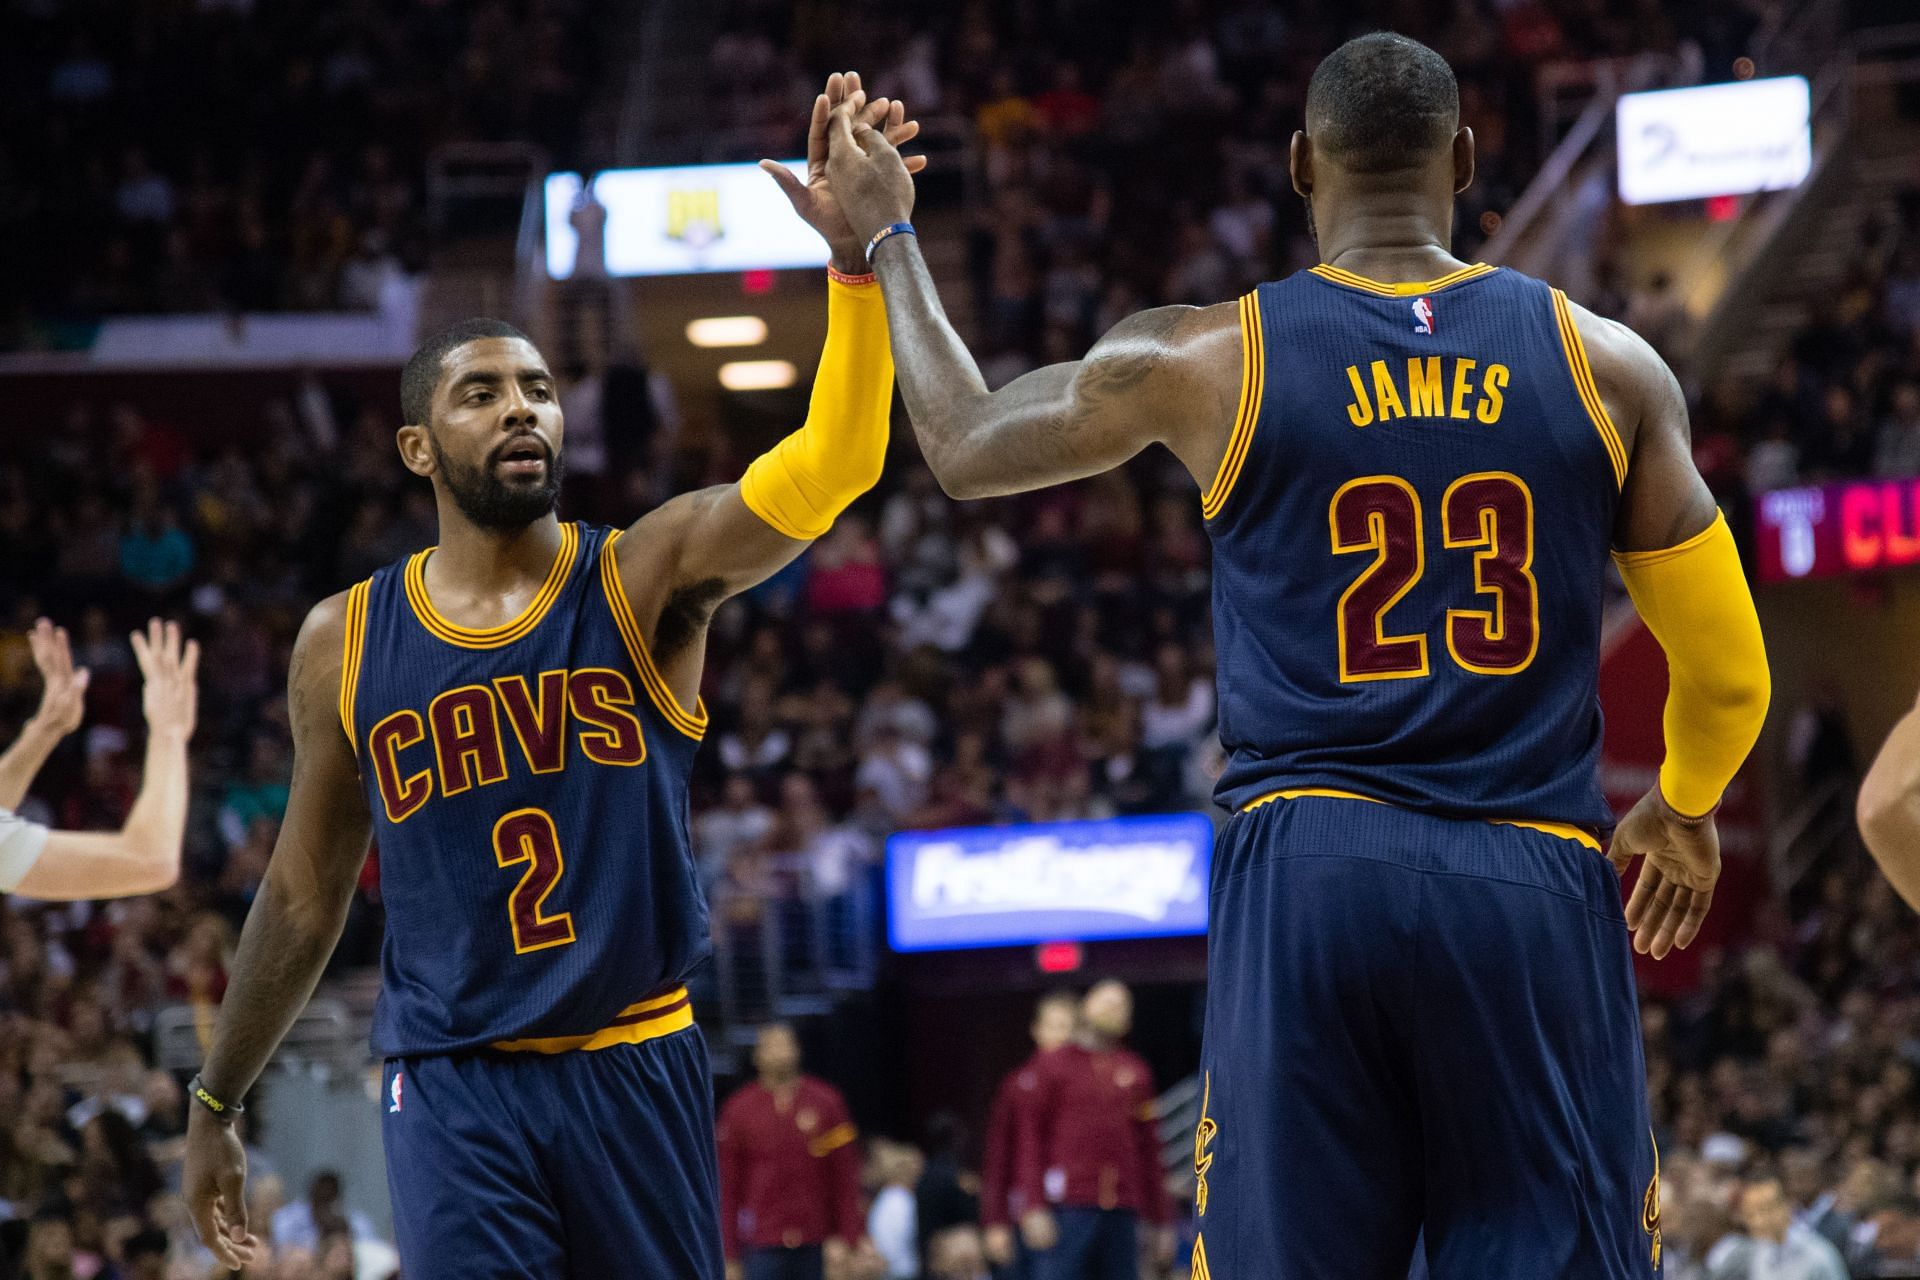 Kyrie Irving and LeBron James of the Cleveland Cavaliers